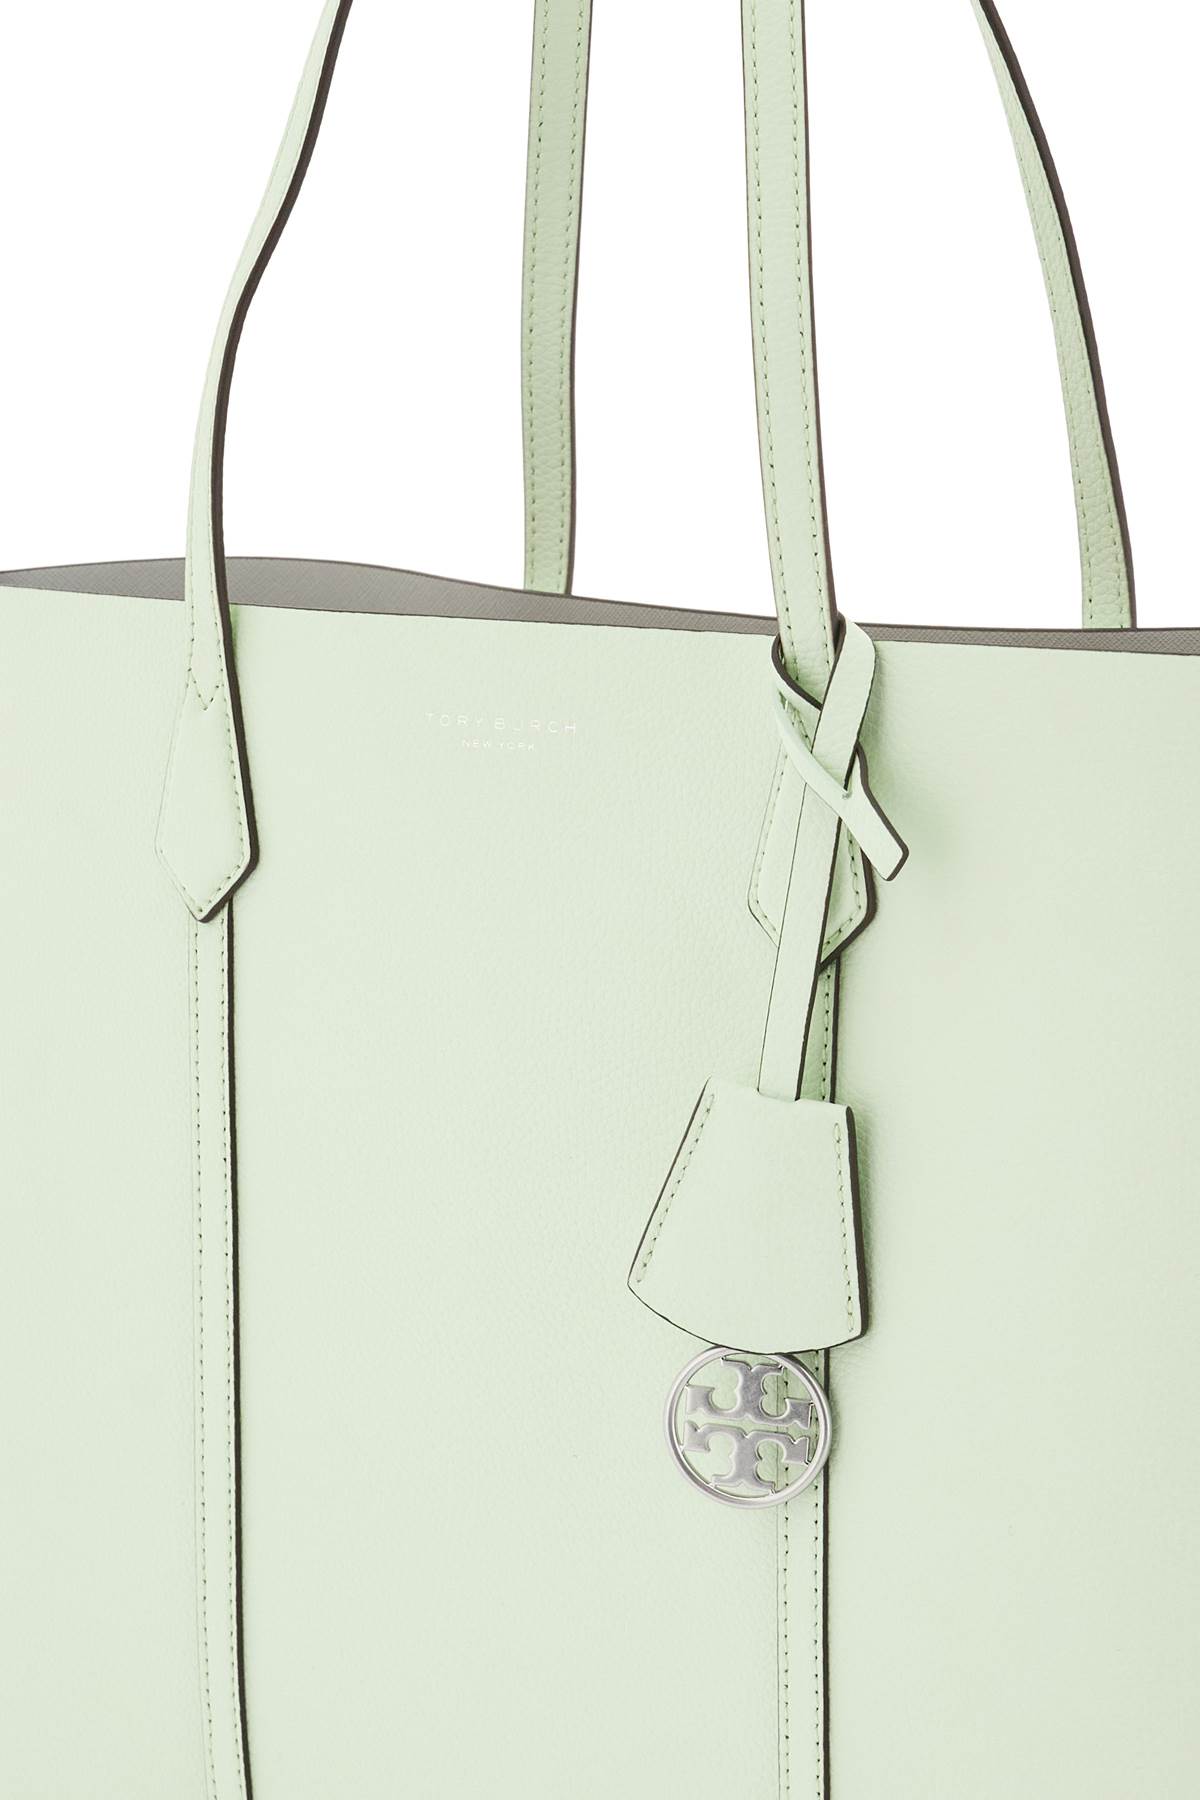 Shop Tory Burch Perry Shopping Bag In Meadow Mist (green)